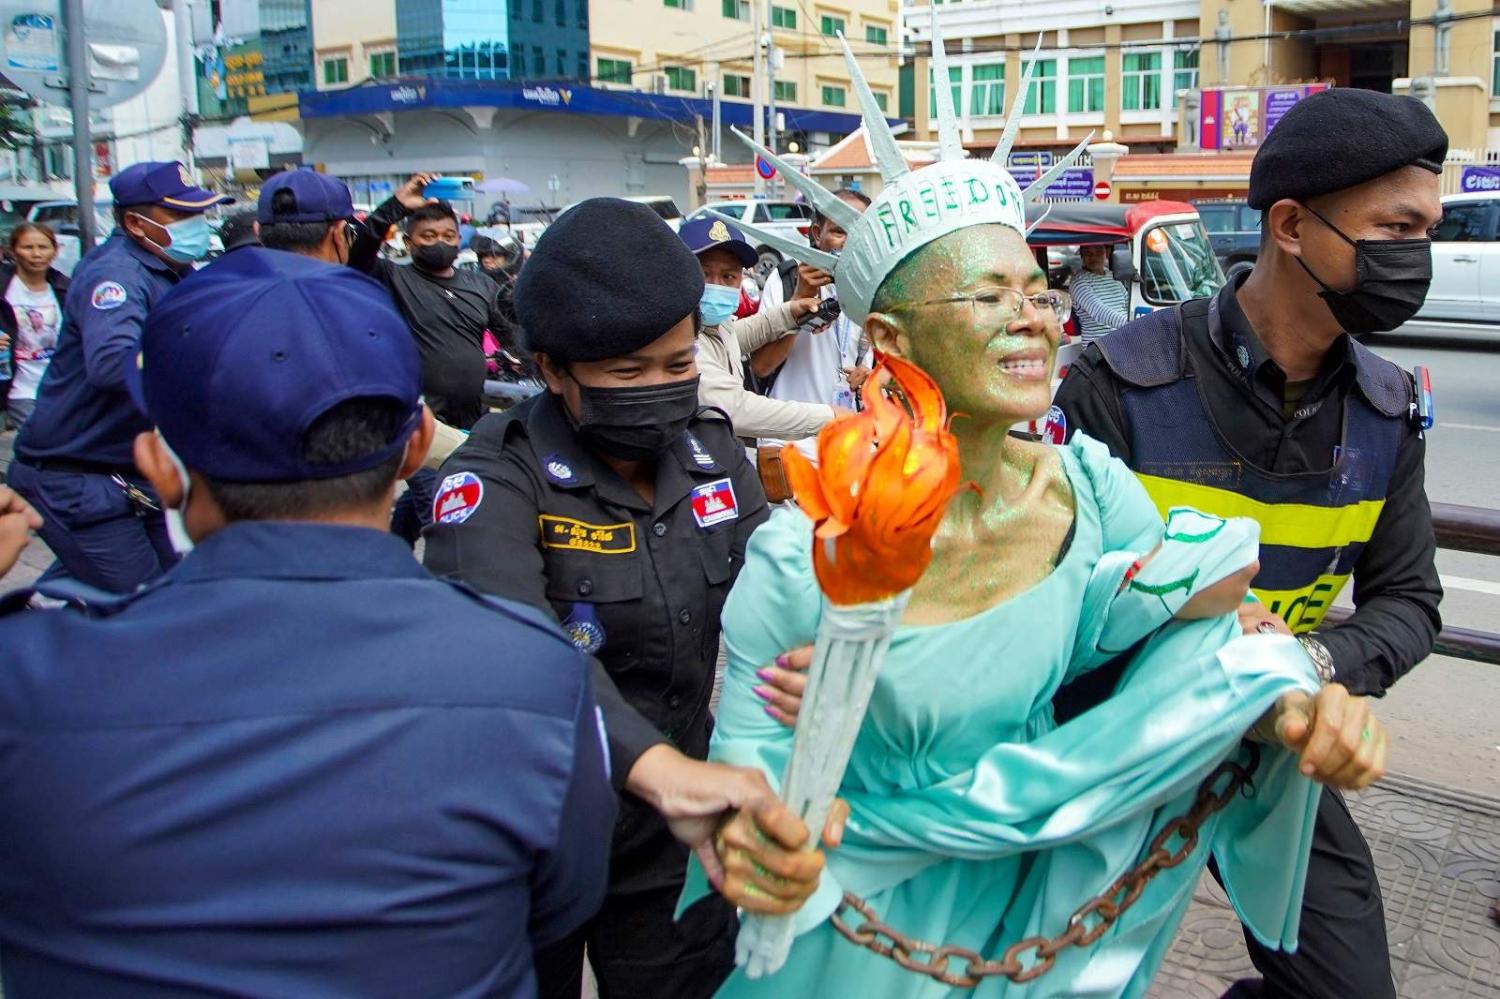 Cambodian-US human rights advocate Theary Seng, dressed as “Lady Liberty”, is arrested by police after being found guilty of treason, Phnom Penh, 14 June 2022 (Samuel/AFP via Getty Images)